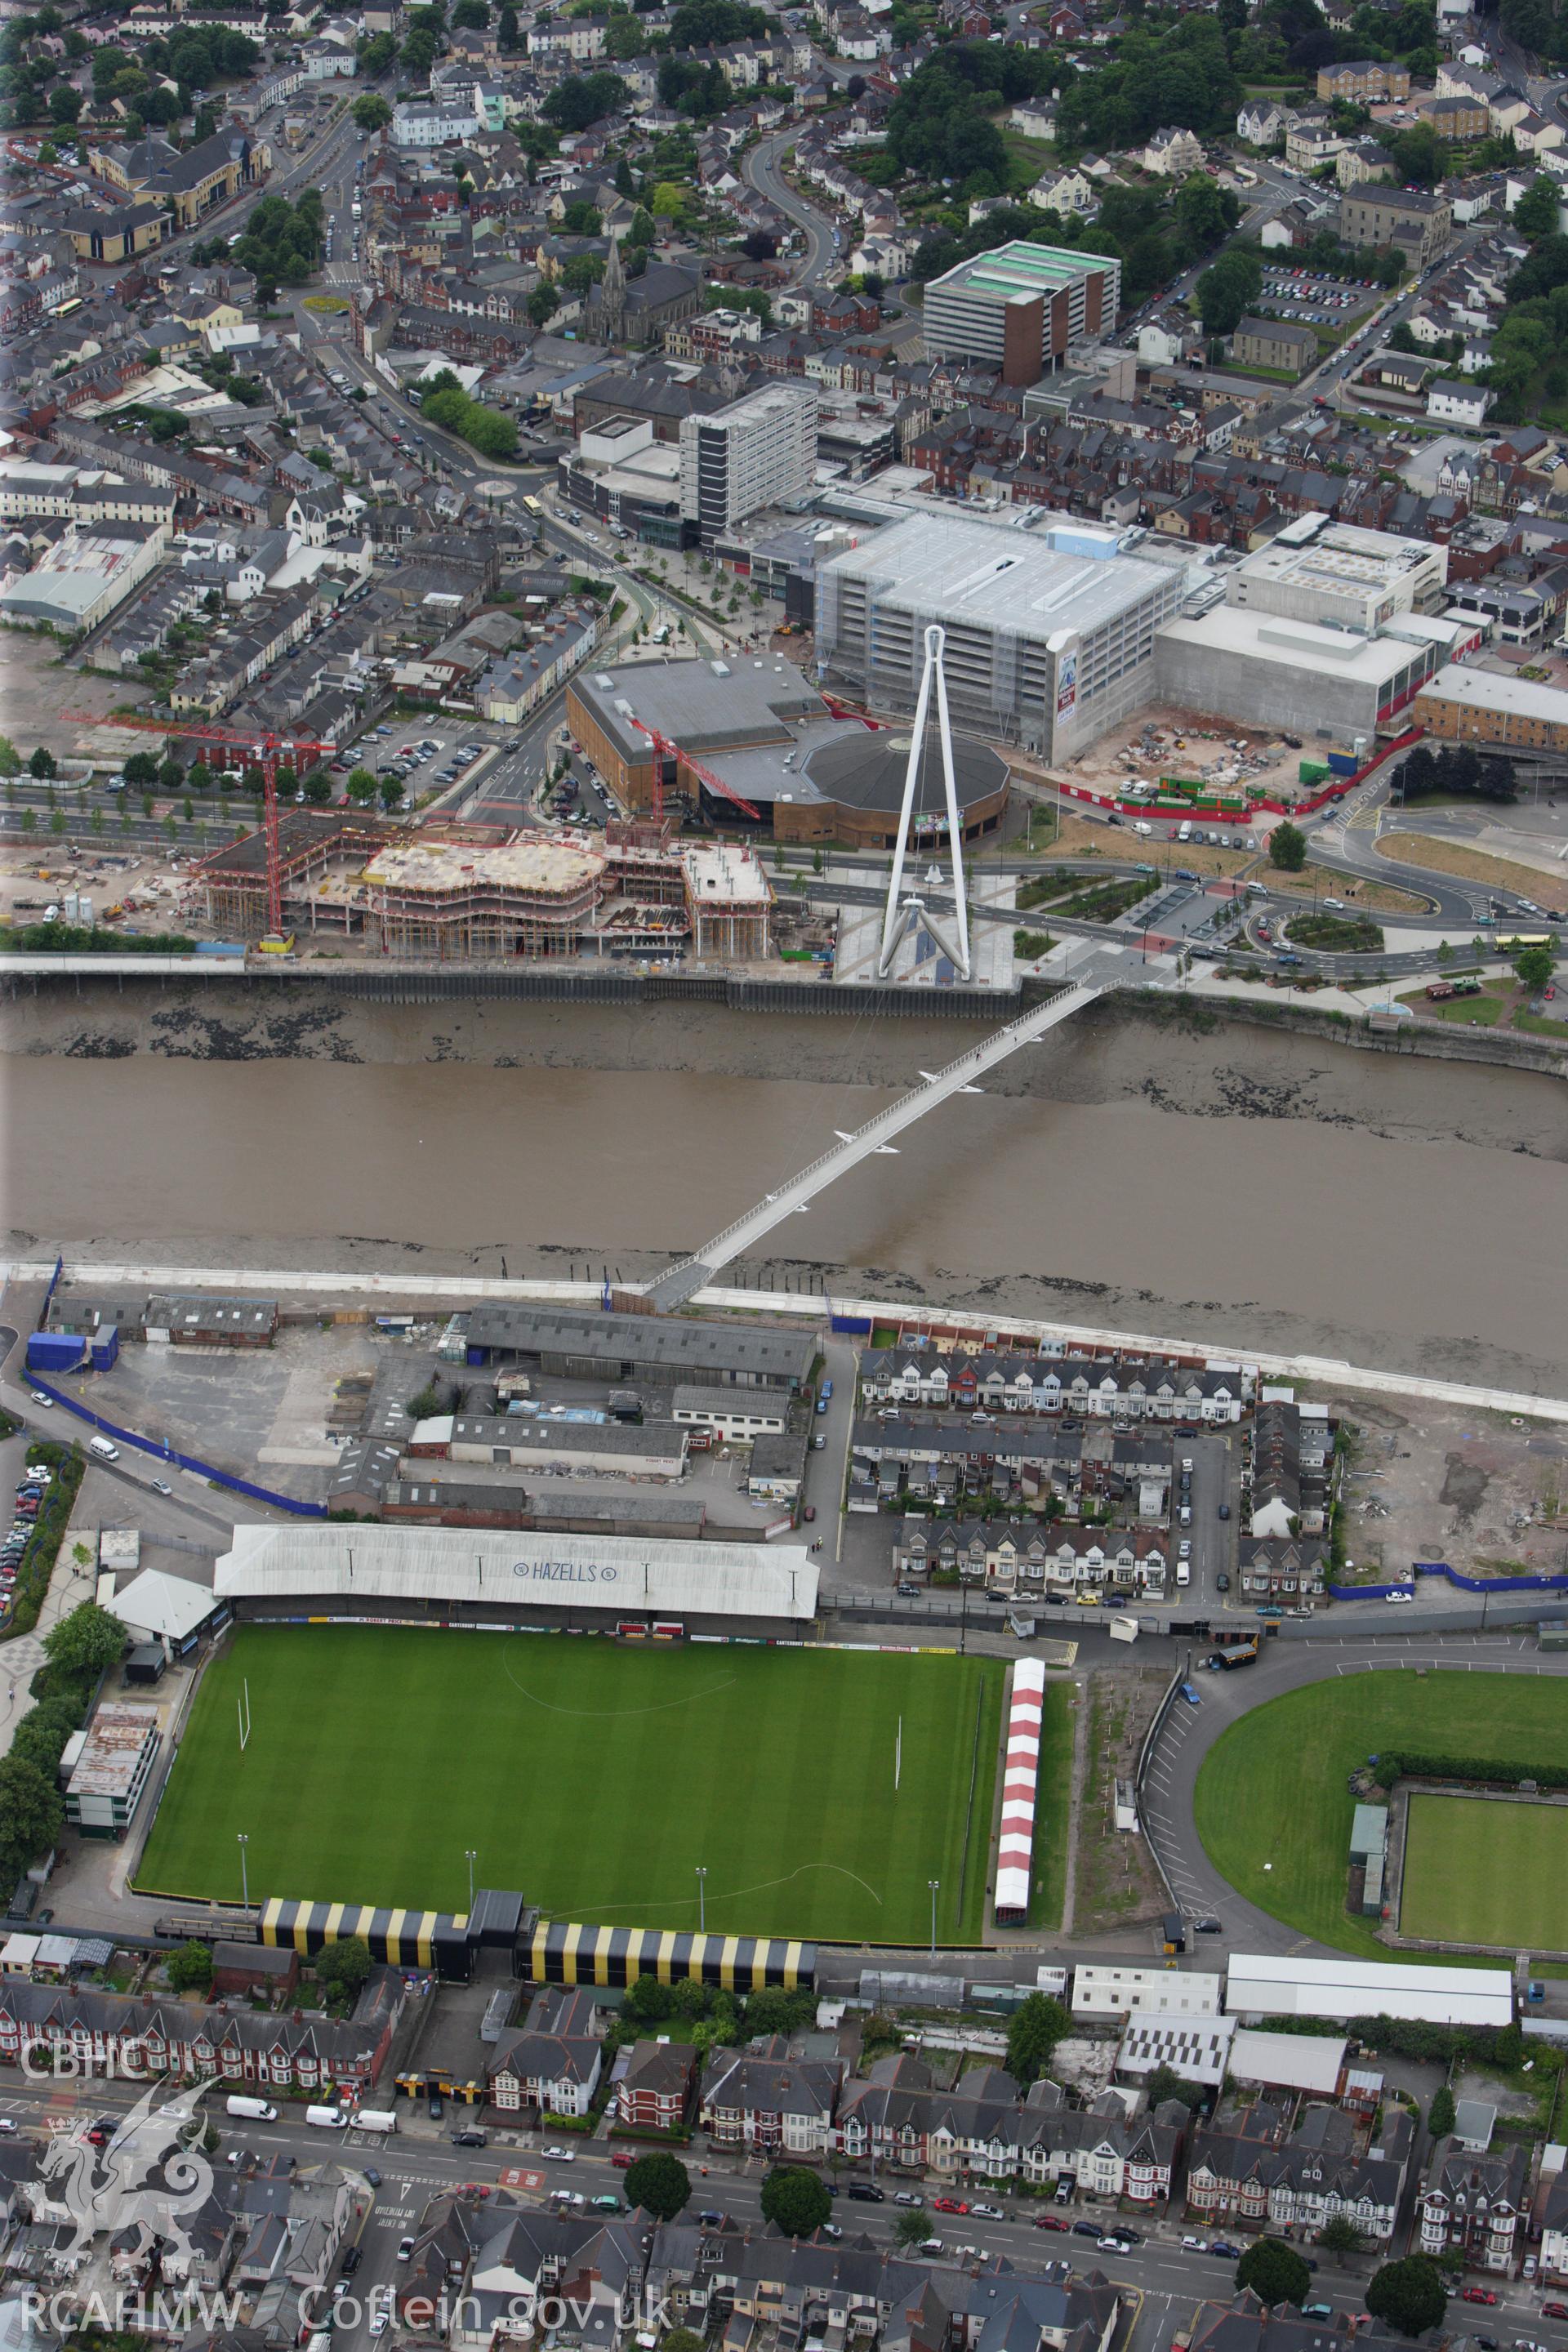 RCAHMW colour oblique aerial photograph of Newport, Gwent. Taken on 09 July 2009 by Toby Driver